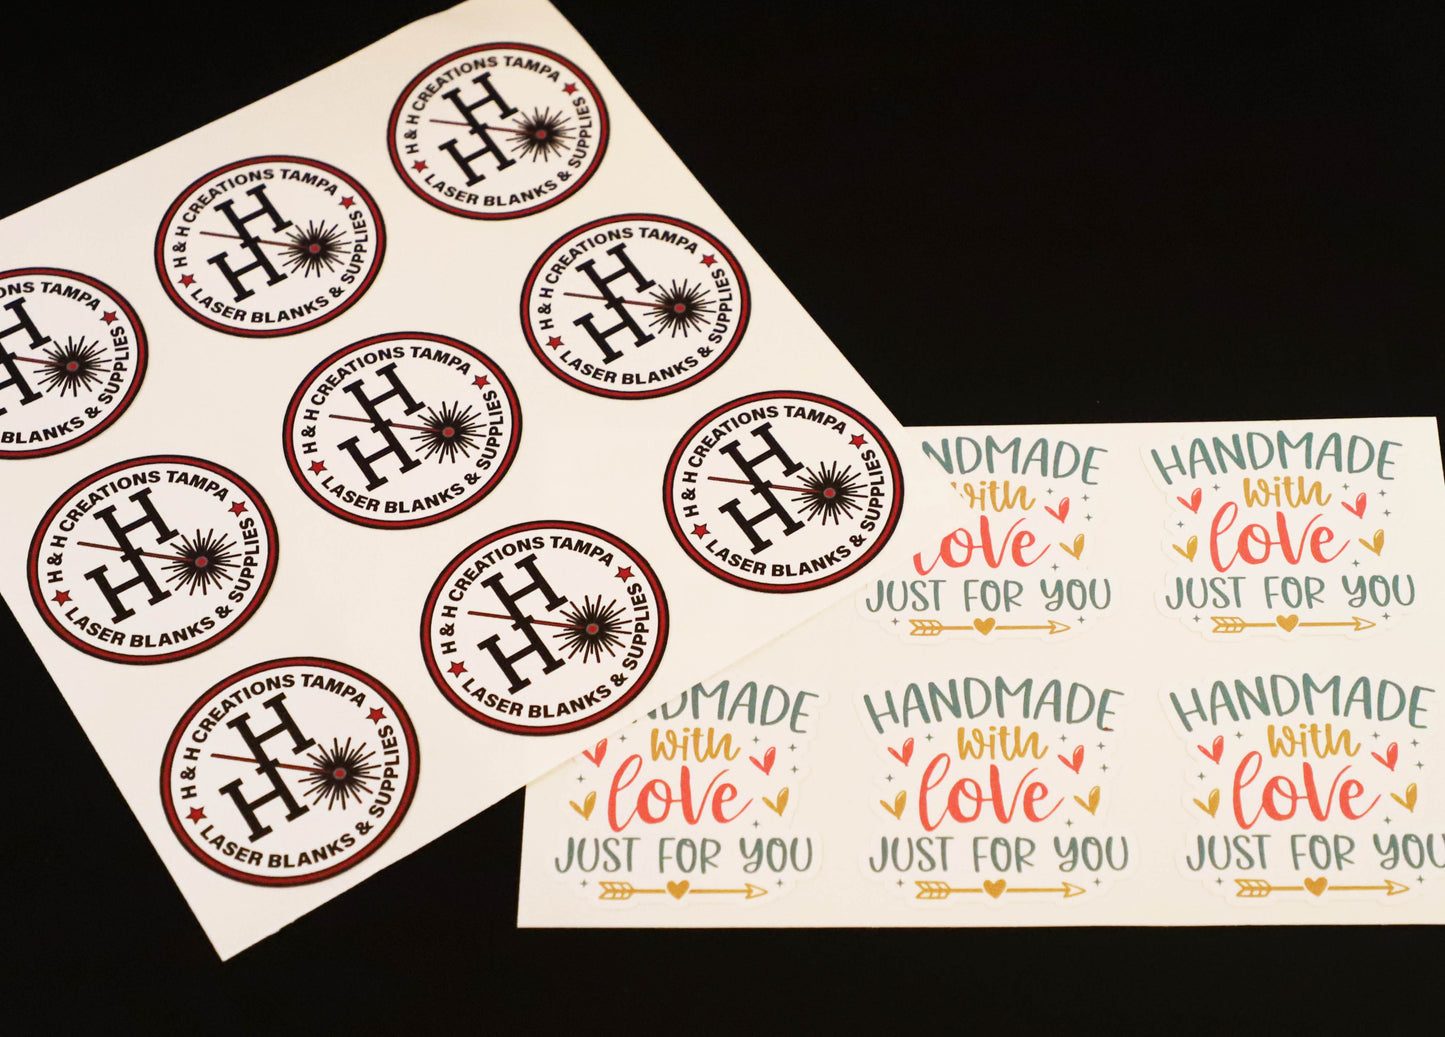 Vinyl Stock Business Stickers - Handmade with Love - Just for You